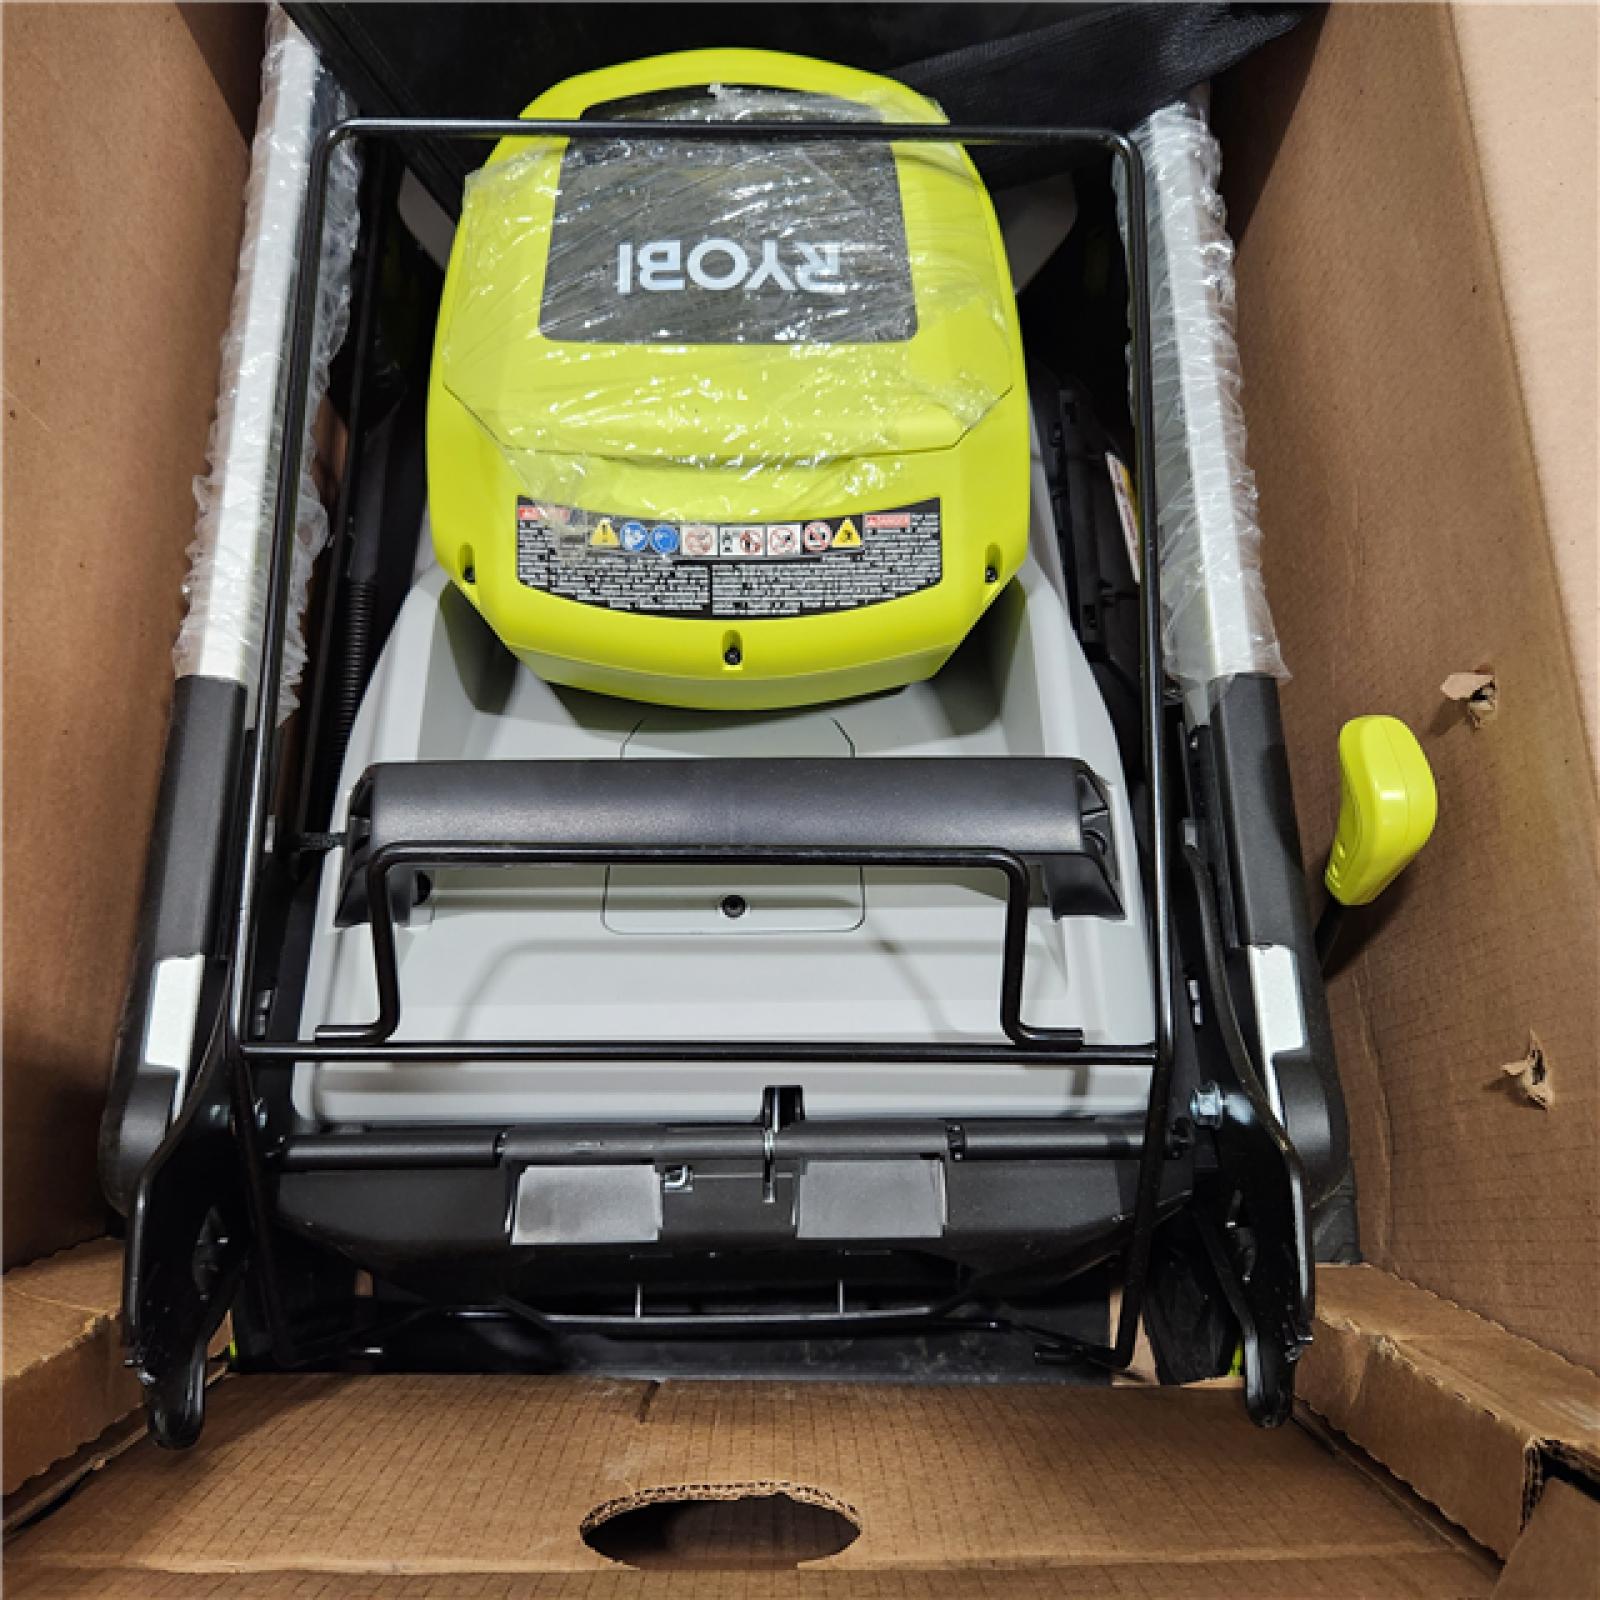 Dallas Location - As-Is RYOBI 40V HP Brushless 21 in.Mower - (2) 6.0 Ah Batteries & Charger-Appears Excellent Condition